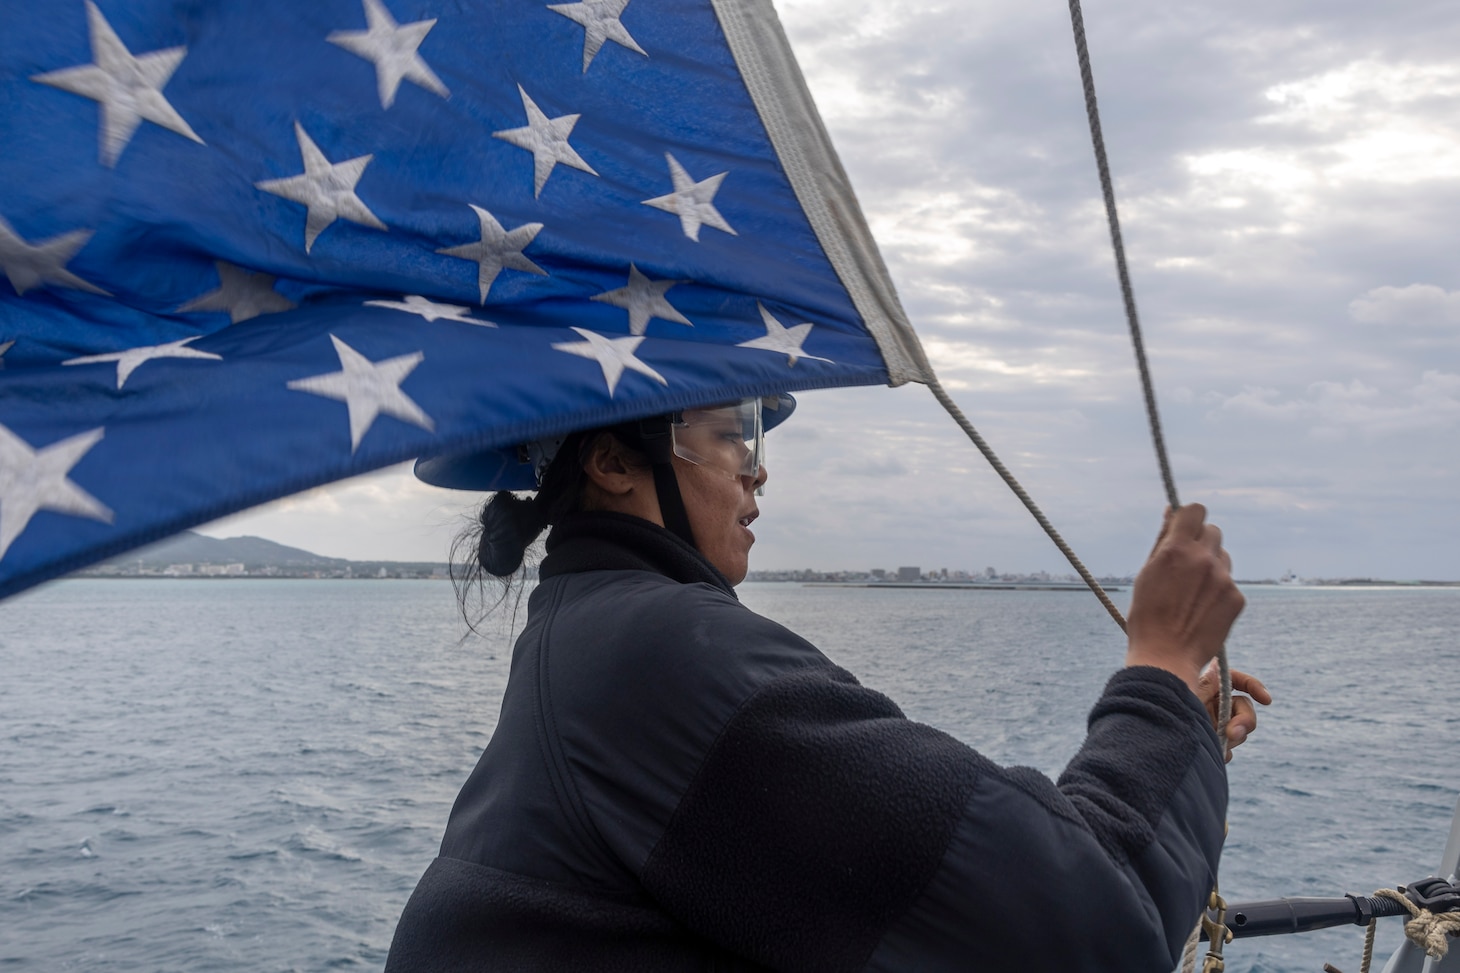 ISHIGAKI, Japan (Mar. 11, 2024) Boatswain’s Mate 3rd Class Kaitlyn Alfaro hoists the Union Jack during Sea and Anchor detail aboard the Arleigh Burke-class guided-missile destroyer USS Rafael Peralta (DDG 115) upon arrival to Ishigaki, Japan for a regularly scheduled port visit. Rafael Peralta is the first United States destroyer to visit Ishigaki. Rafael Peralta is forward-deployed and assigned to Destroyer Squadron (DESRON) 15, the Navy’s largest DESRON and the U.S. 7th Fleet’s principal surface force. (U.S. Navy photo by Mass Communication Specialist 1st Class Devin Monroe)